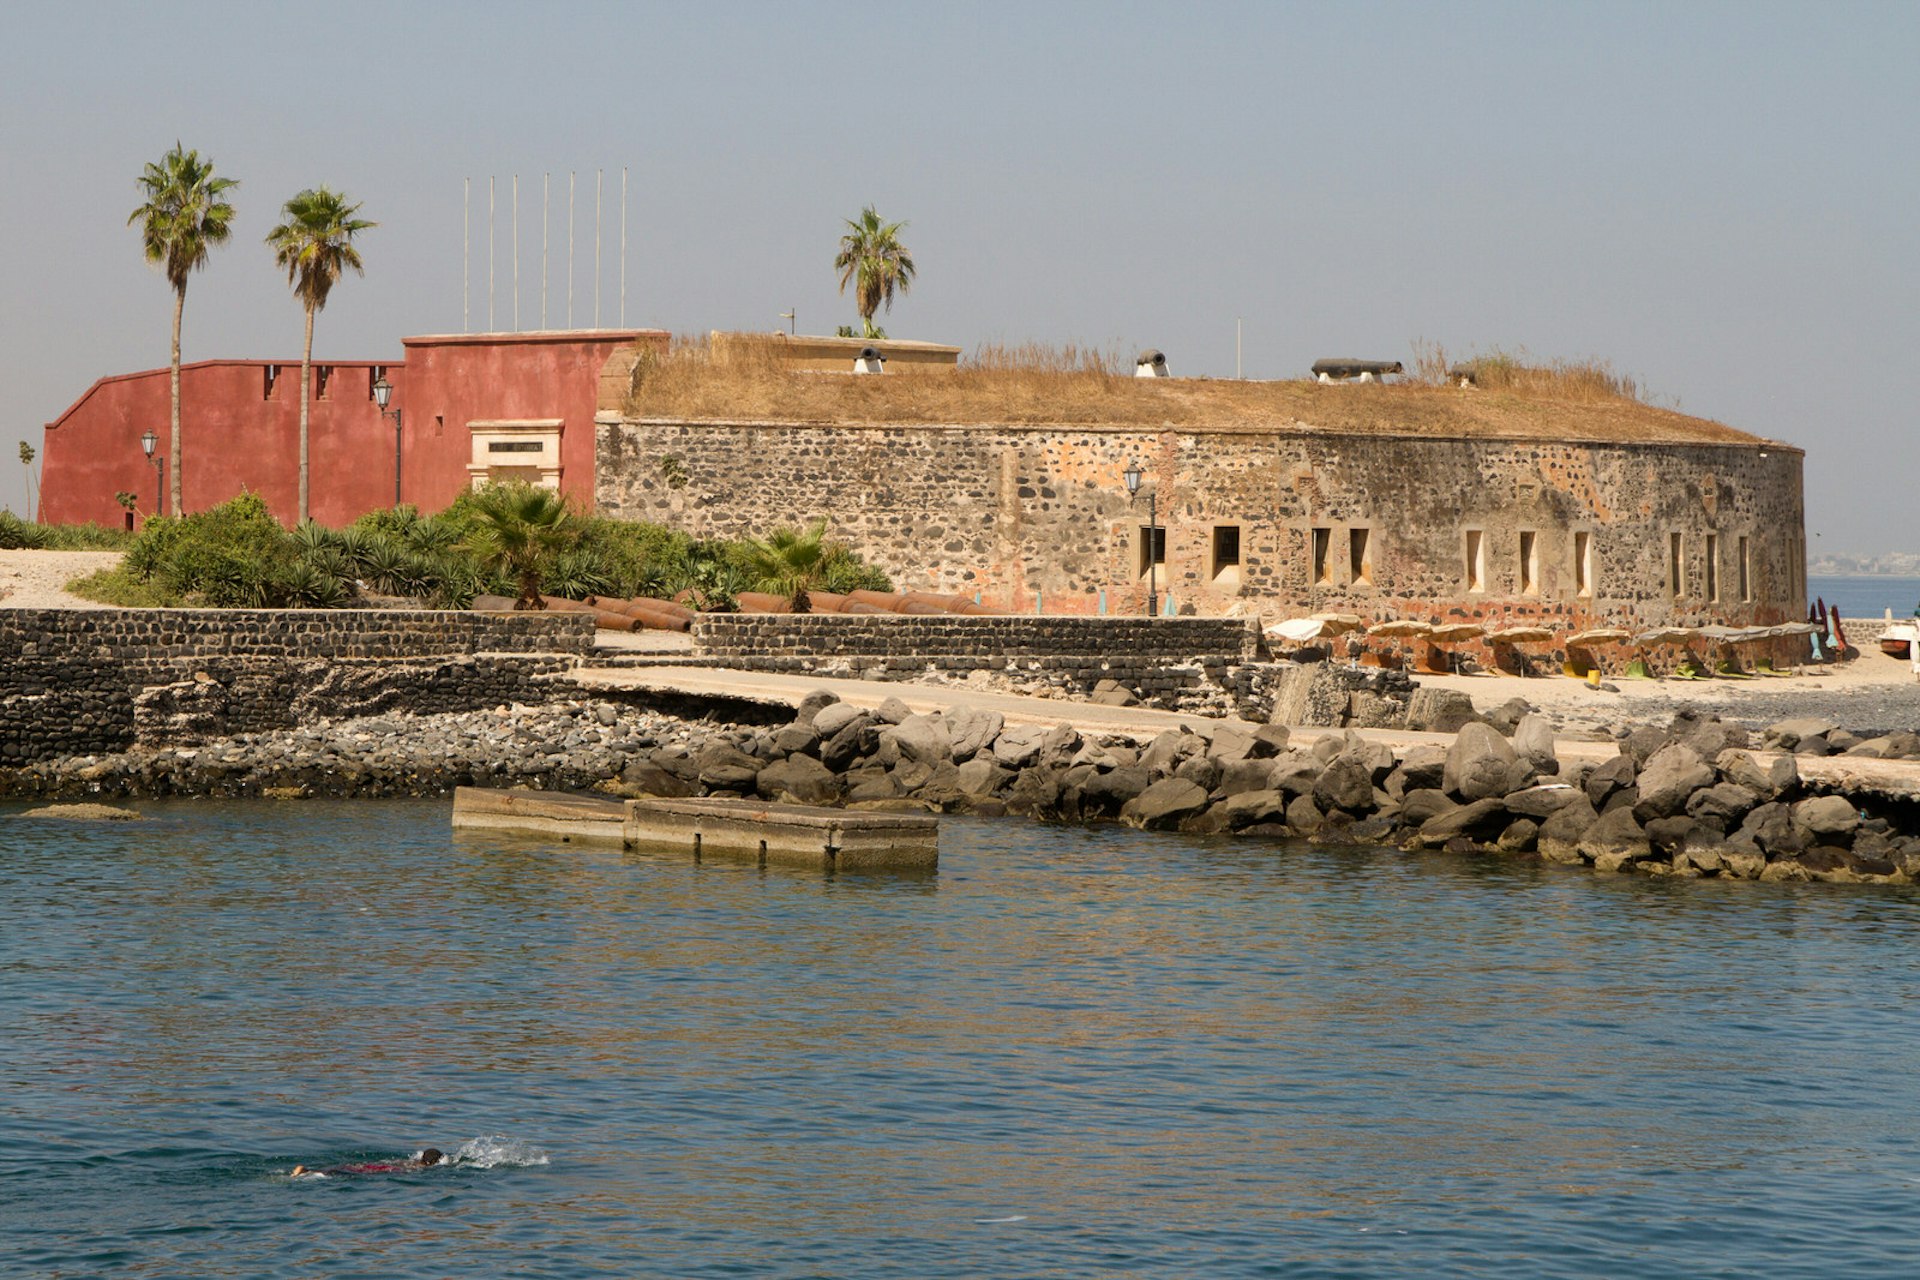 This image looks across the water to Île de Gorée and a circular stone fortress, with its small windows. To the left of the fortress is a pinkish section of the fortress, with palms in the background. A boat floats in the foreground © Antpun / Shutterstock